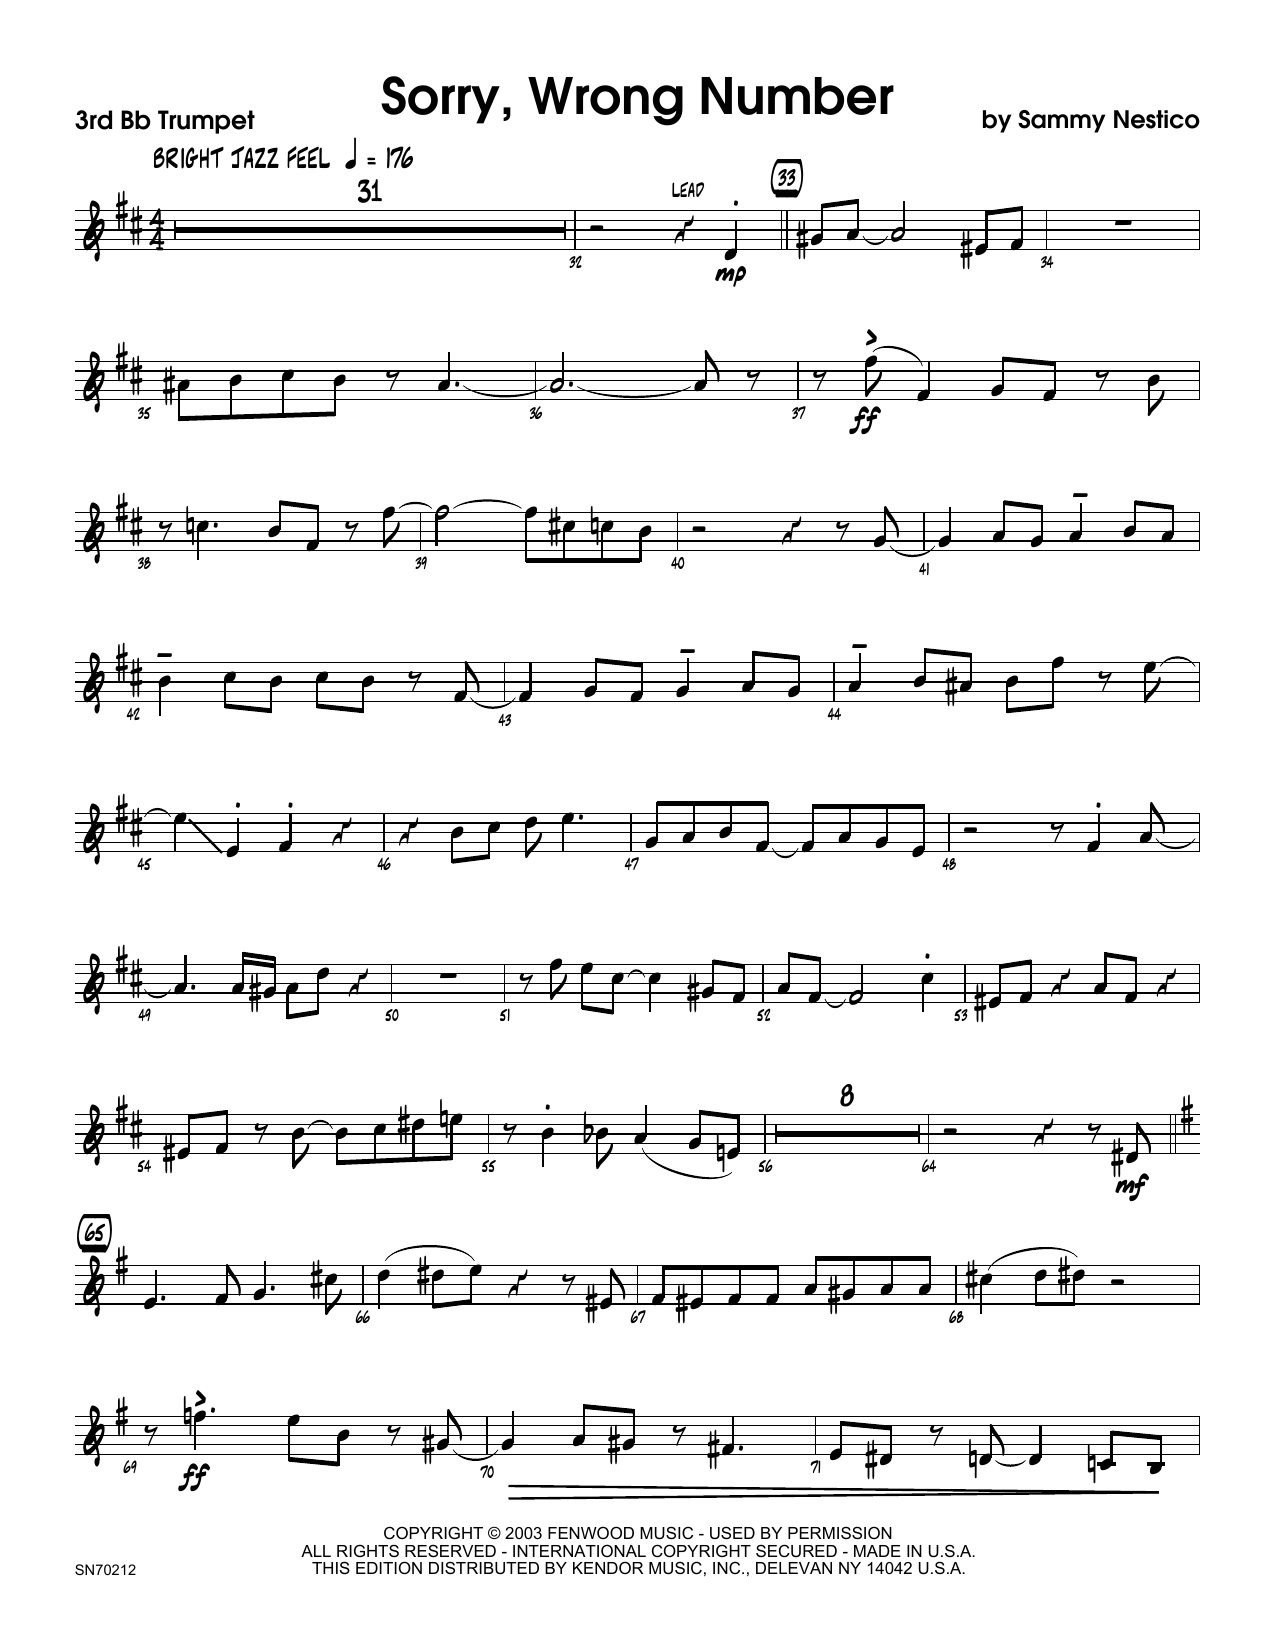 Download Sammy Nestico Sorry, Wrong Number - 3rd Bb Trumpet Sheet Music